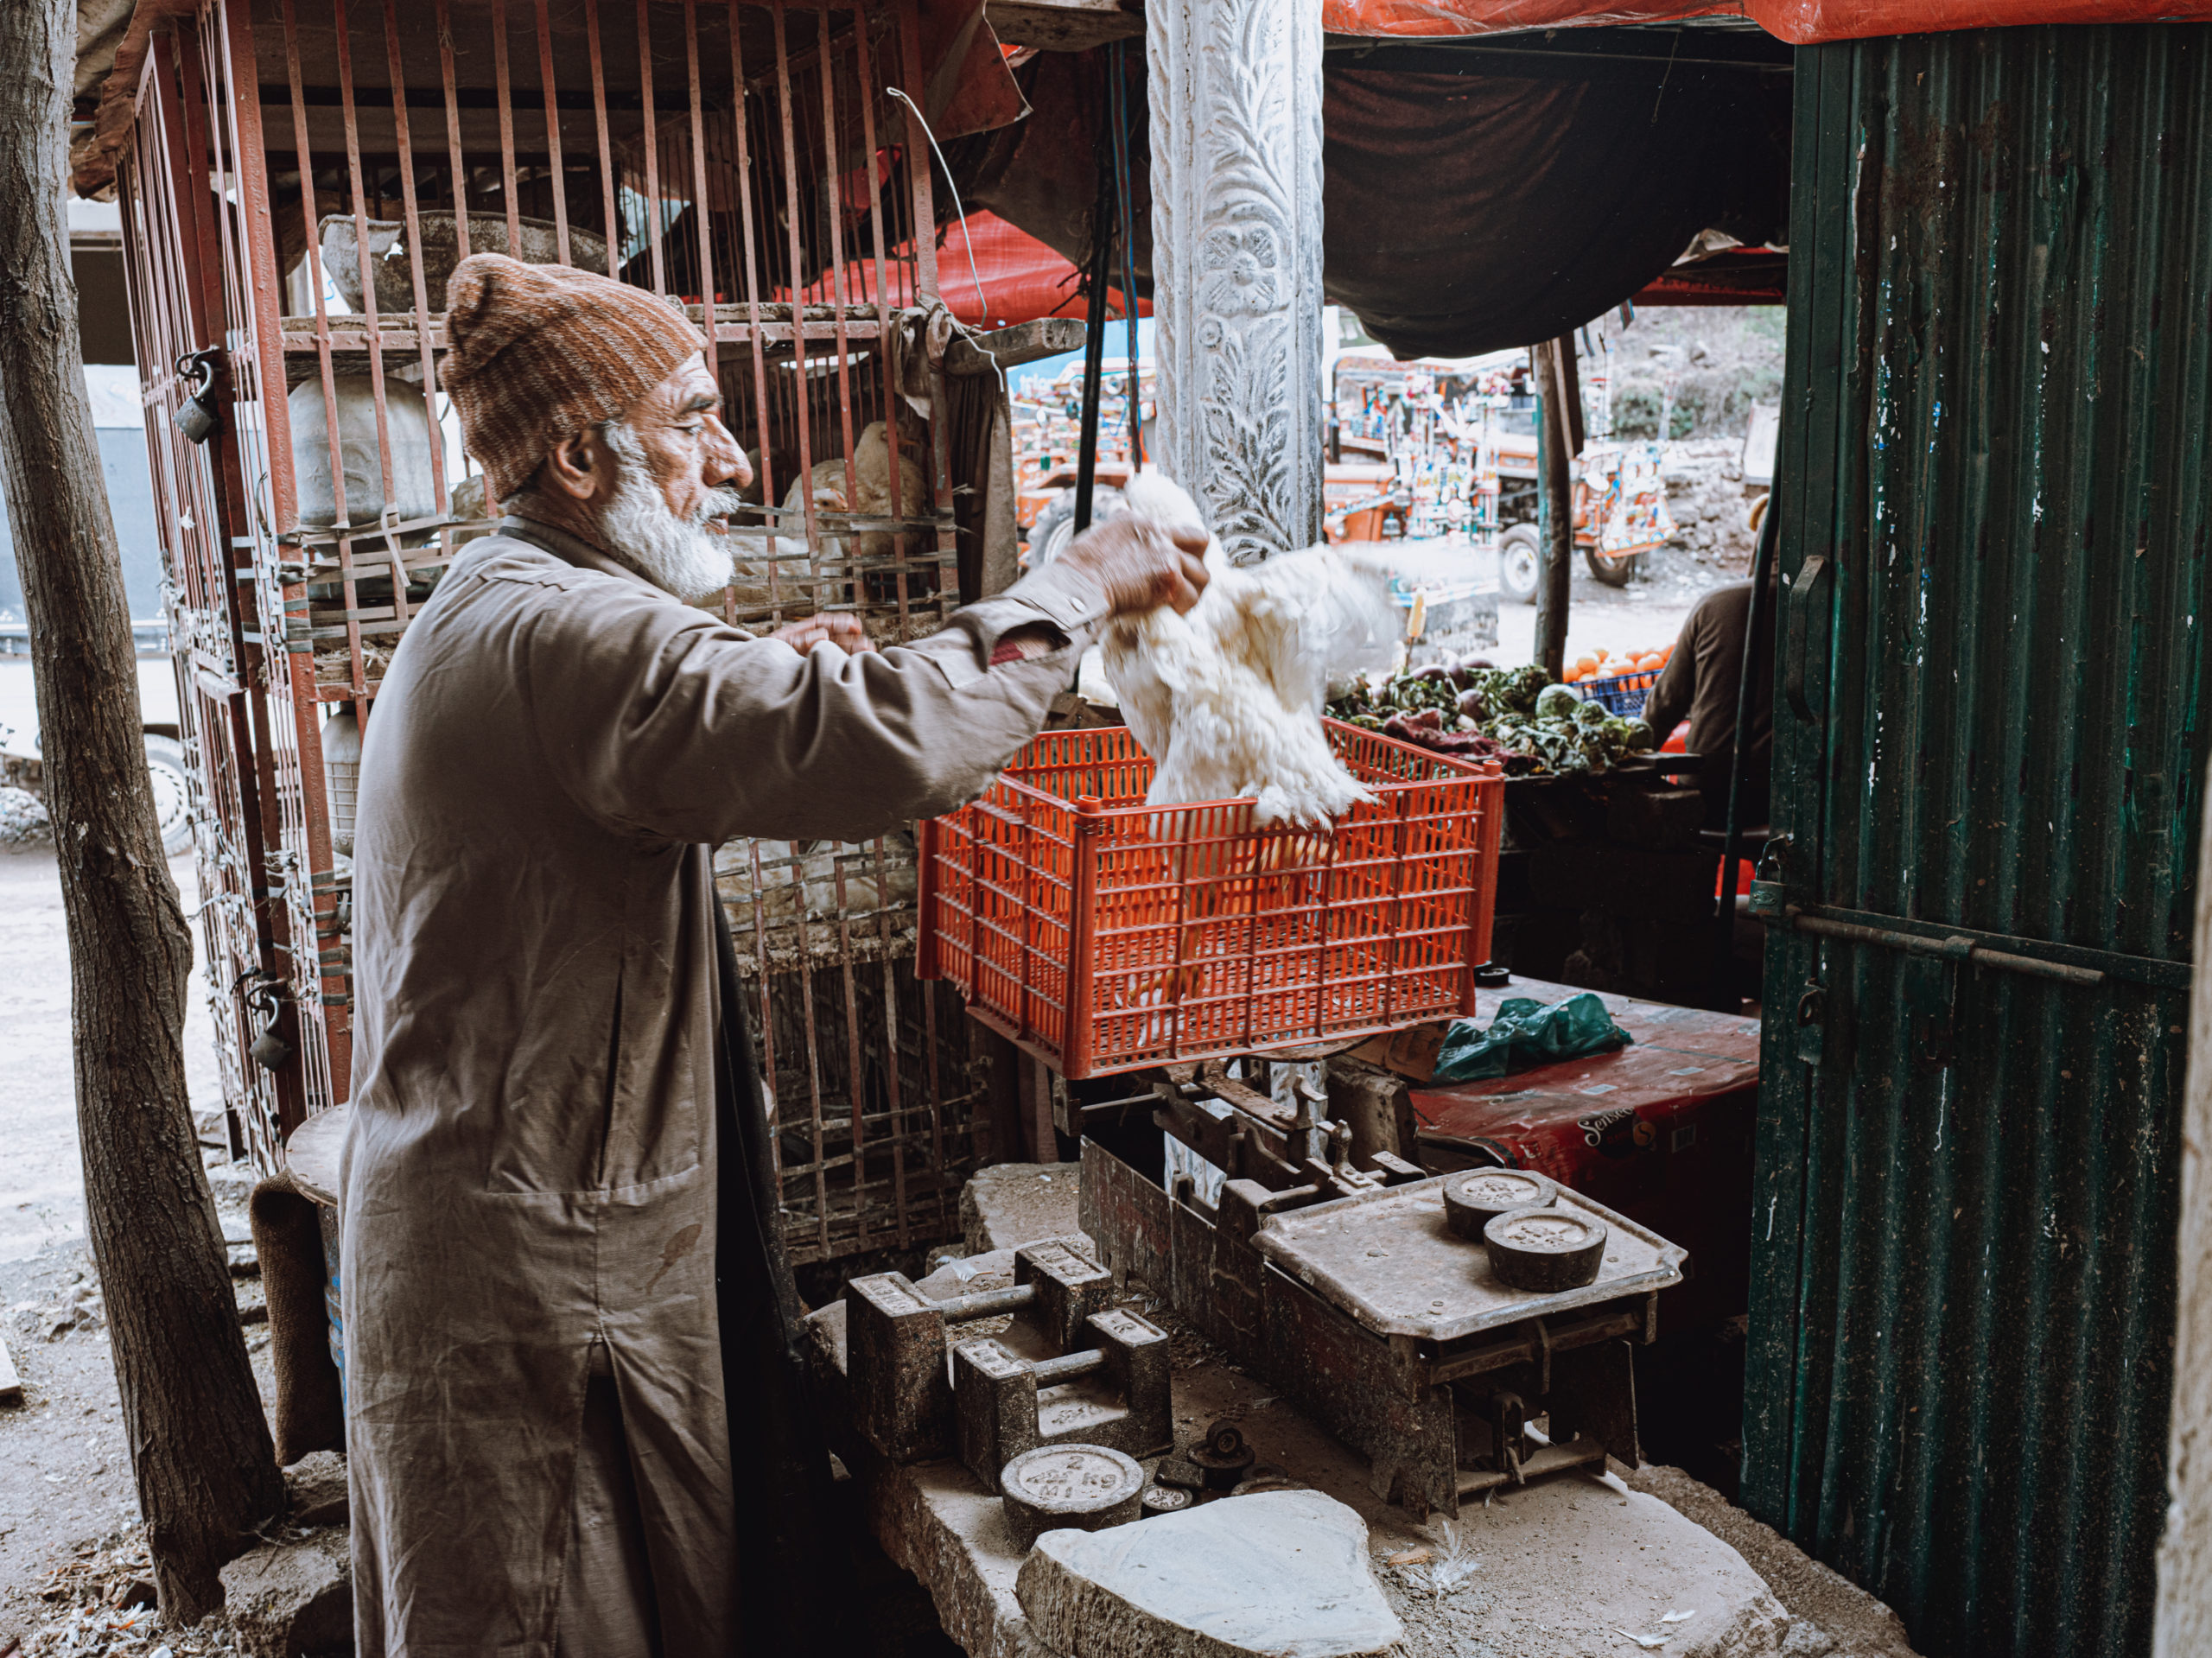 Butcher takes a chicken out of the cage to sell